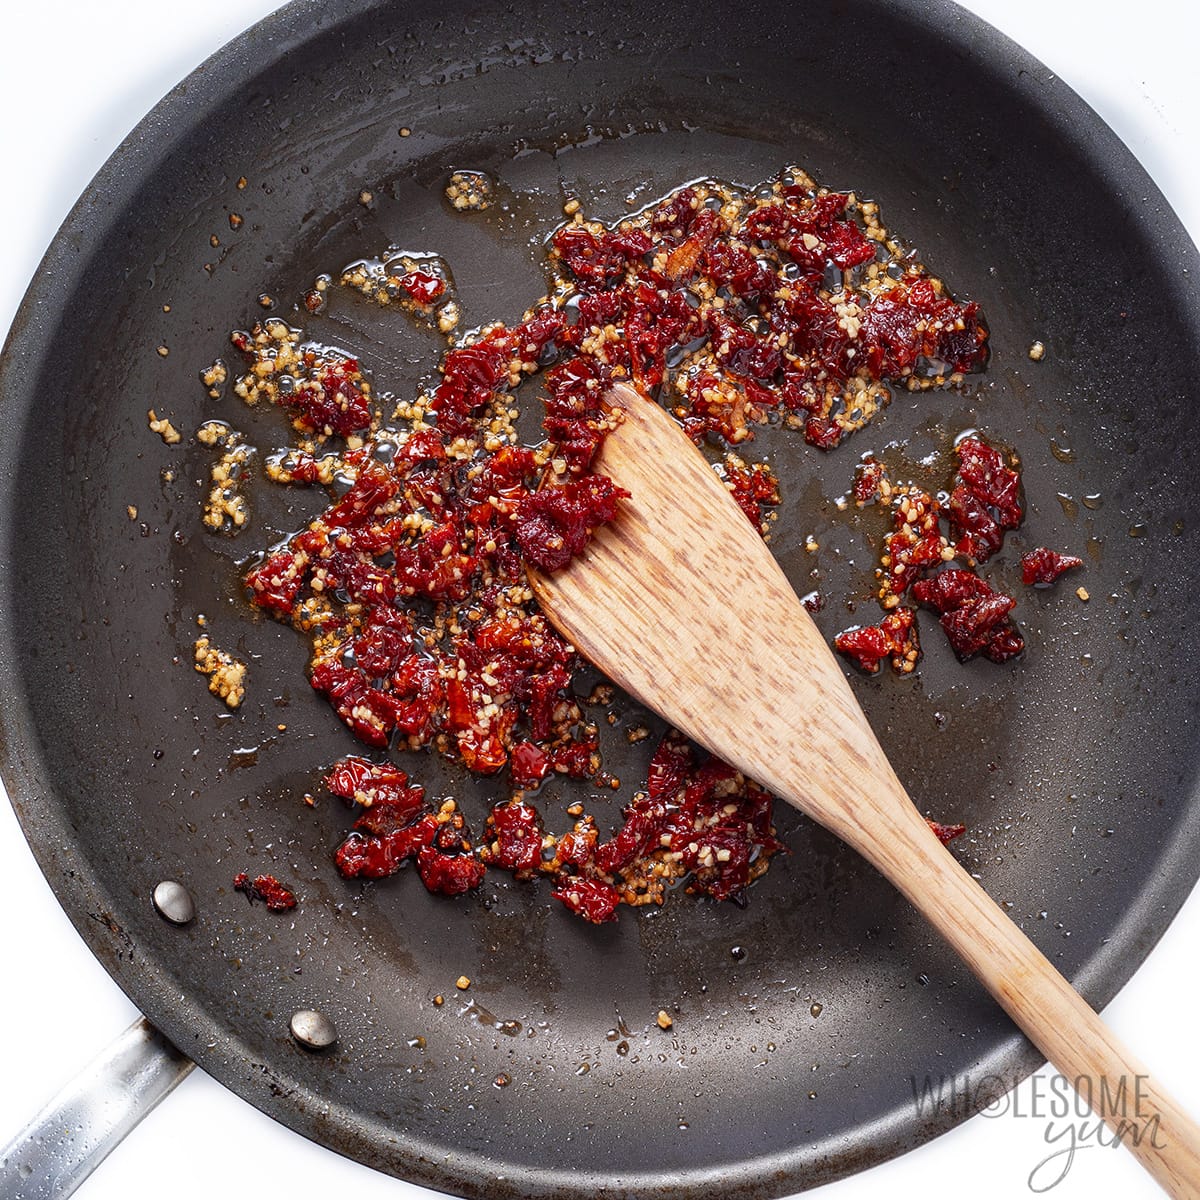 Sauteed garlic and sun-dried tomatoes in a skillet.